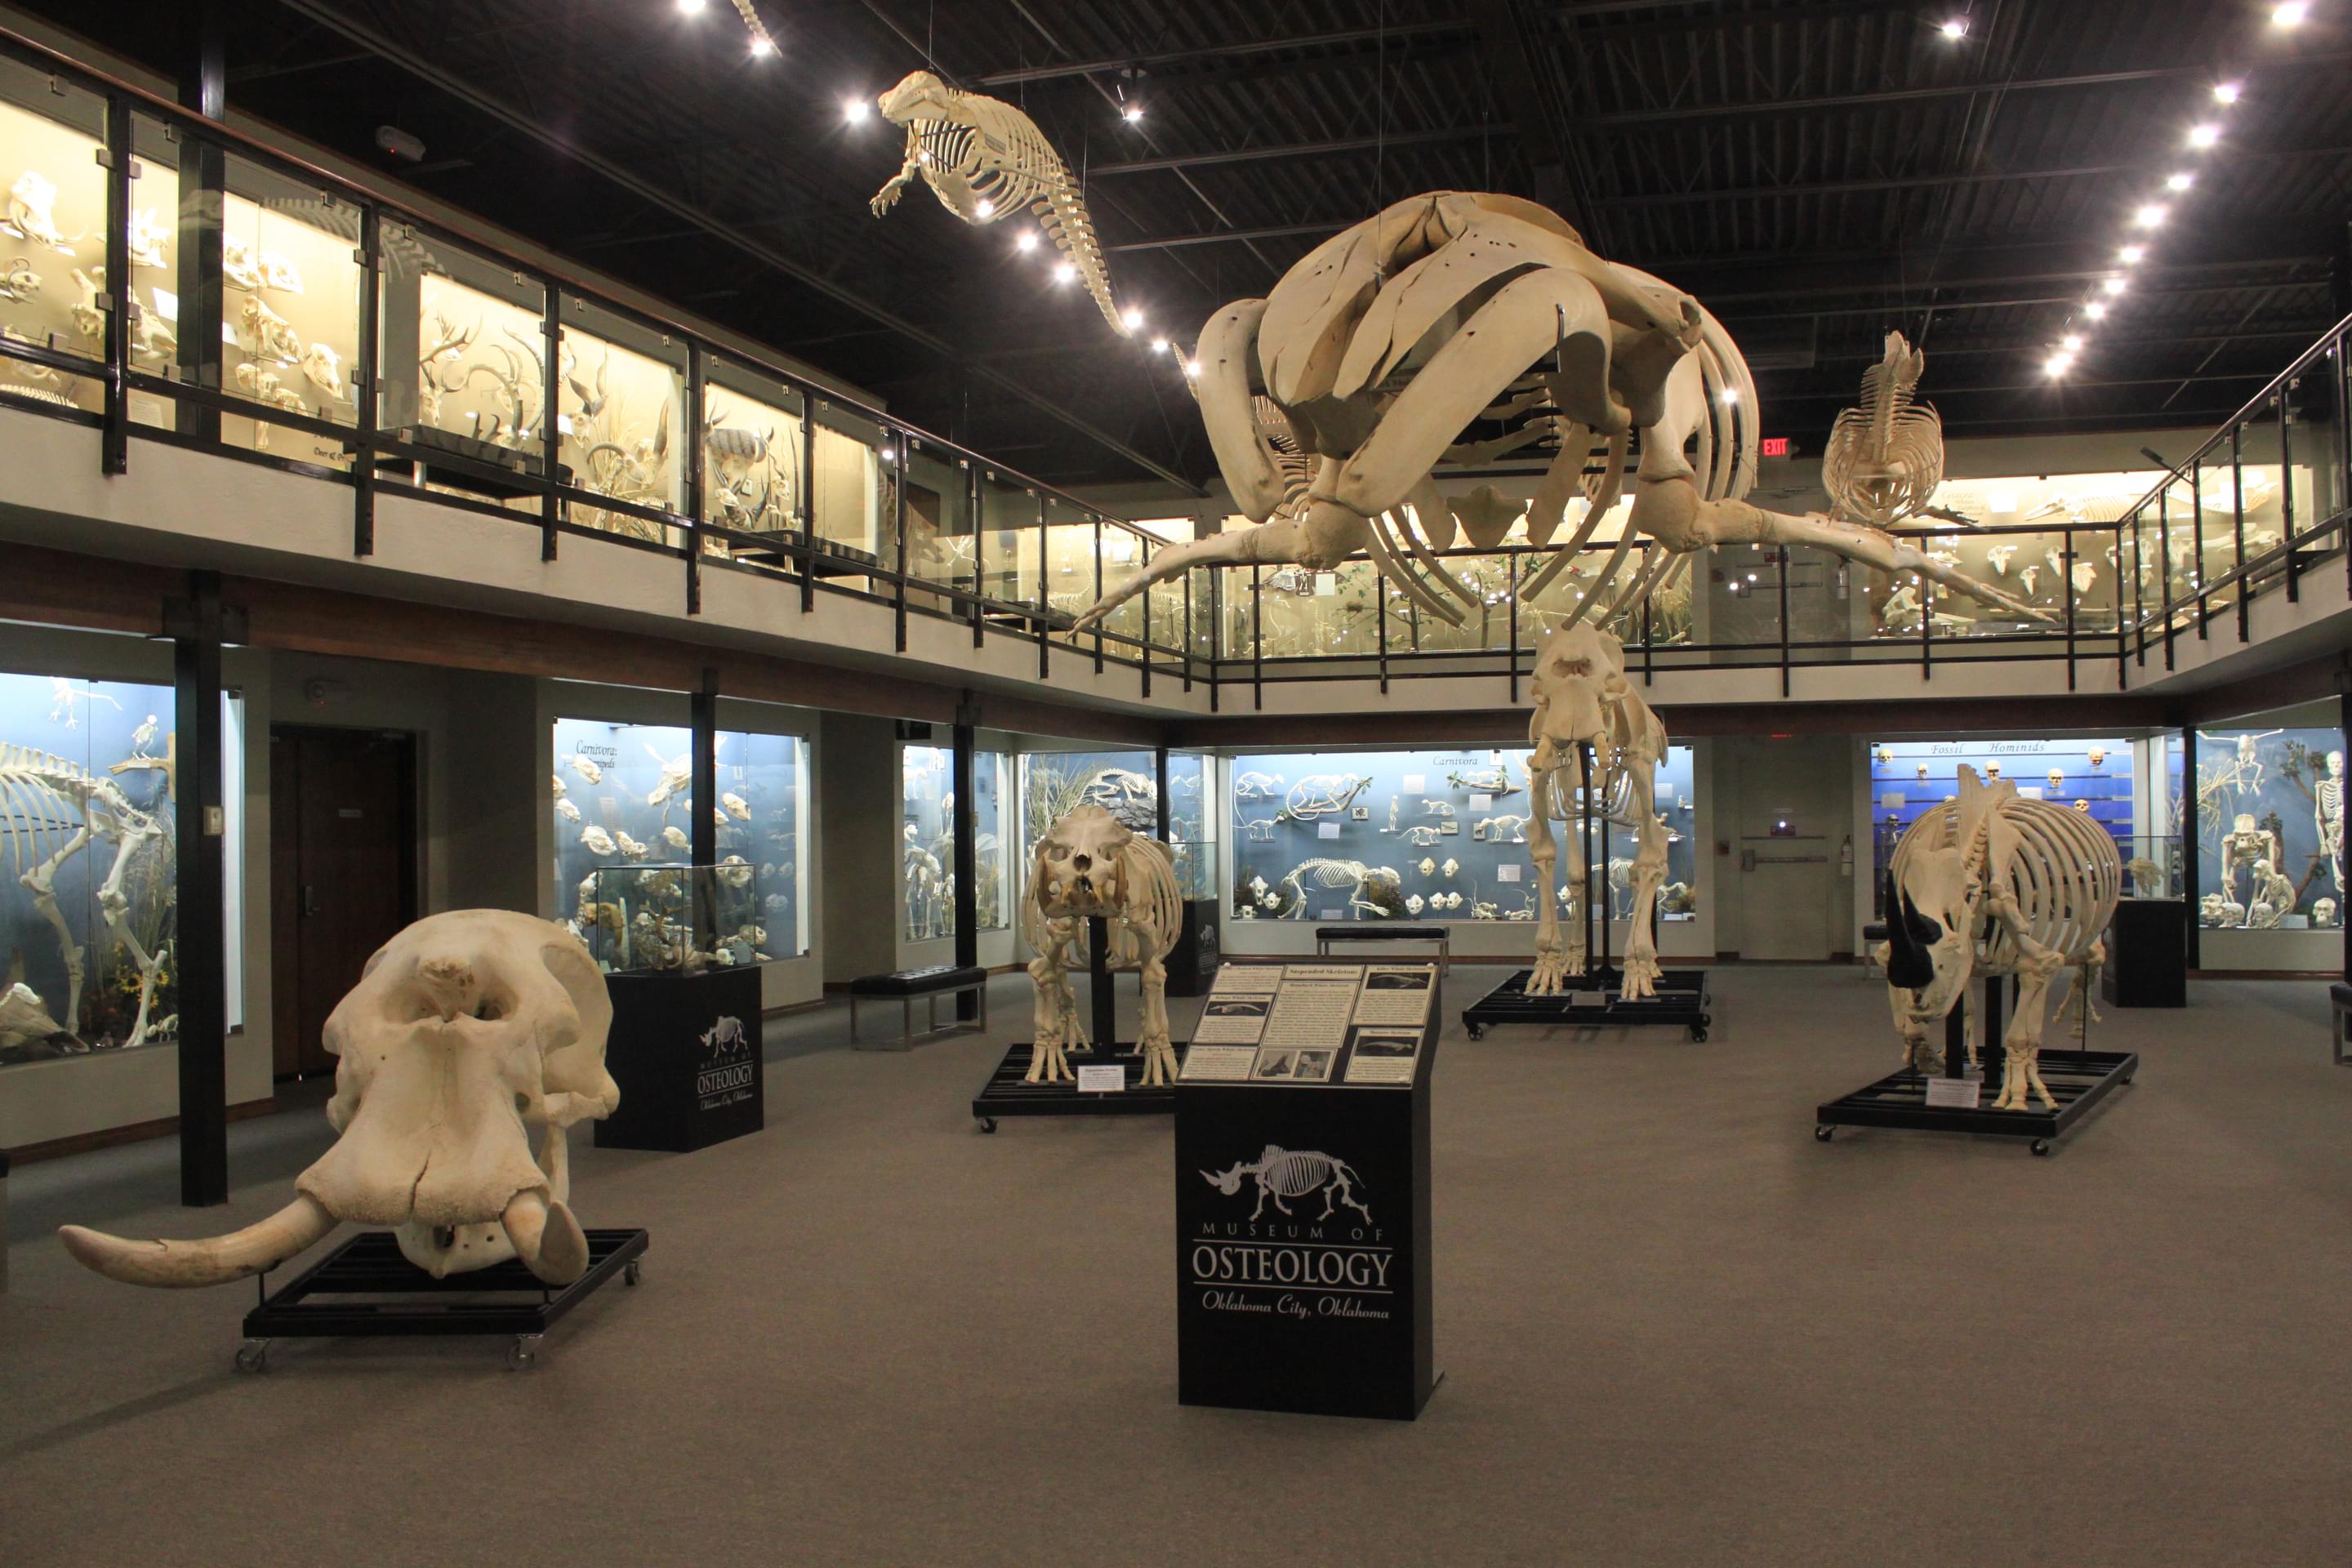 Skeletons Museum of Osteology Overview